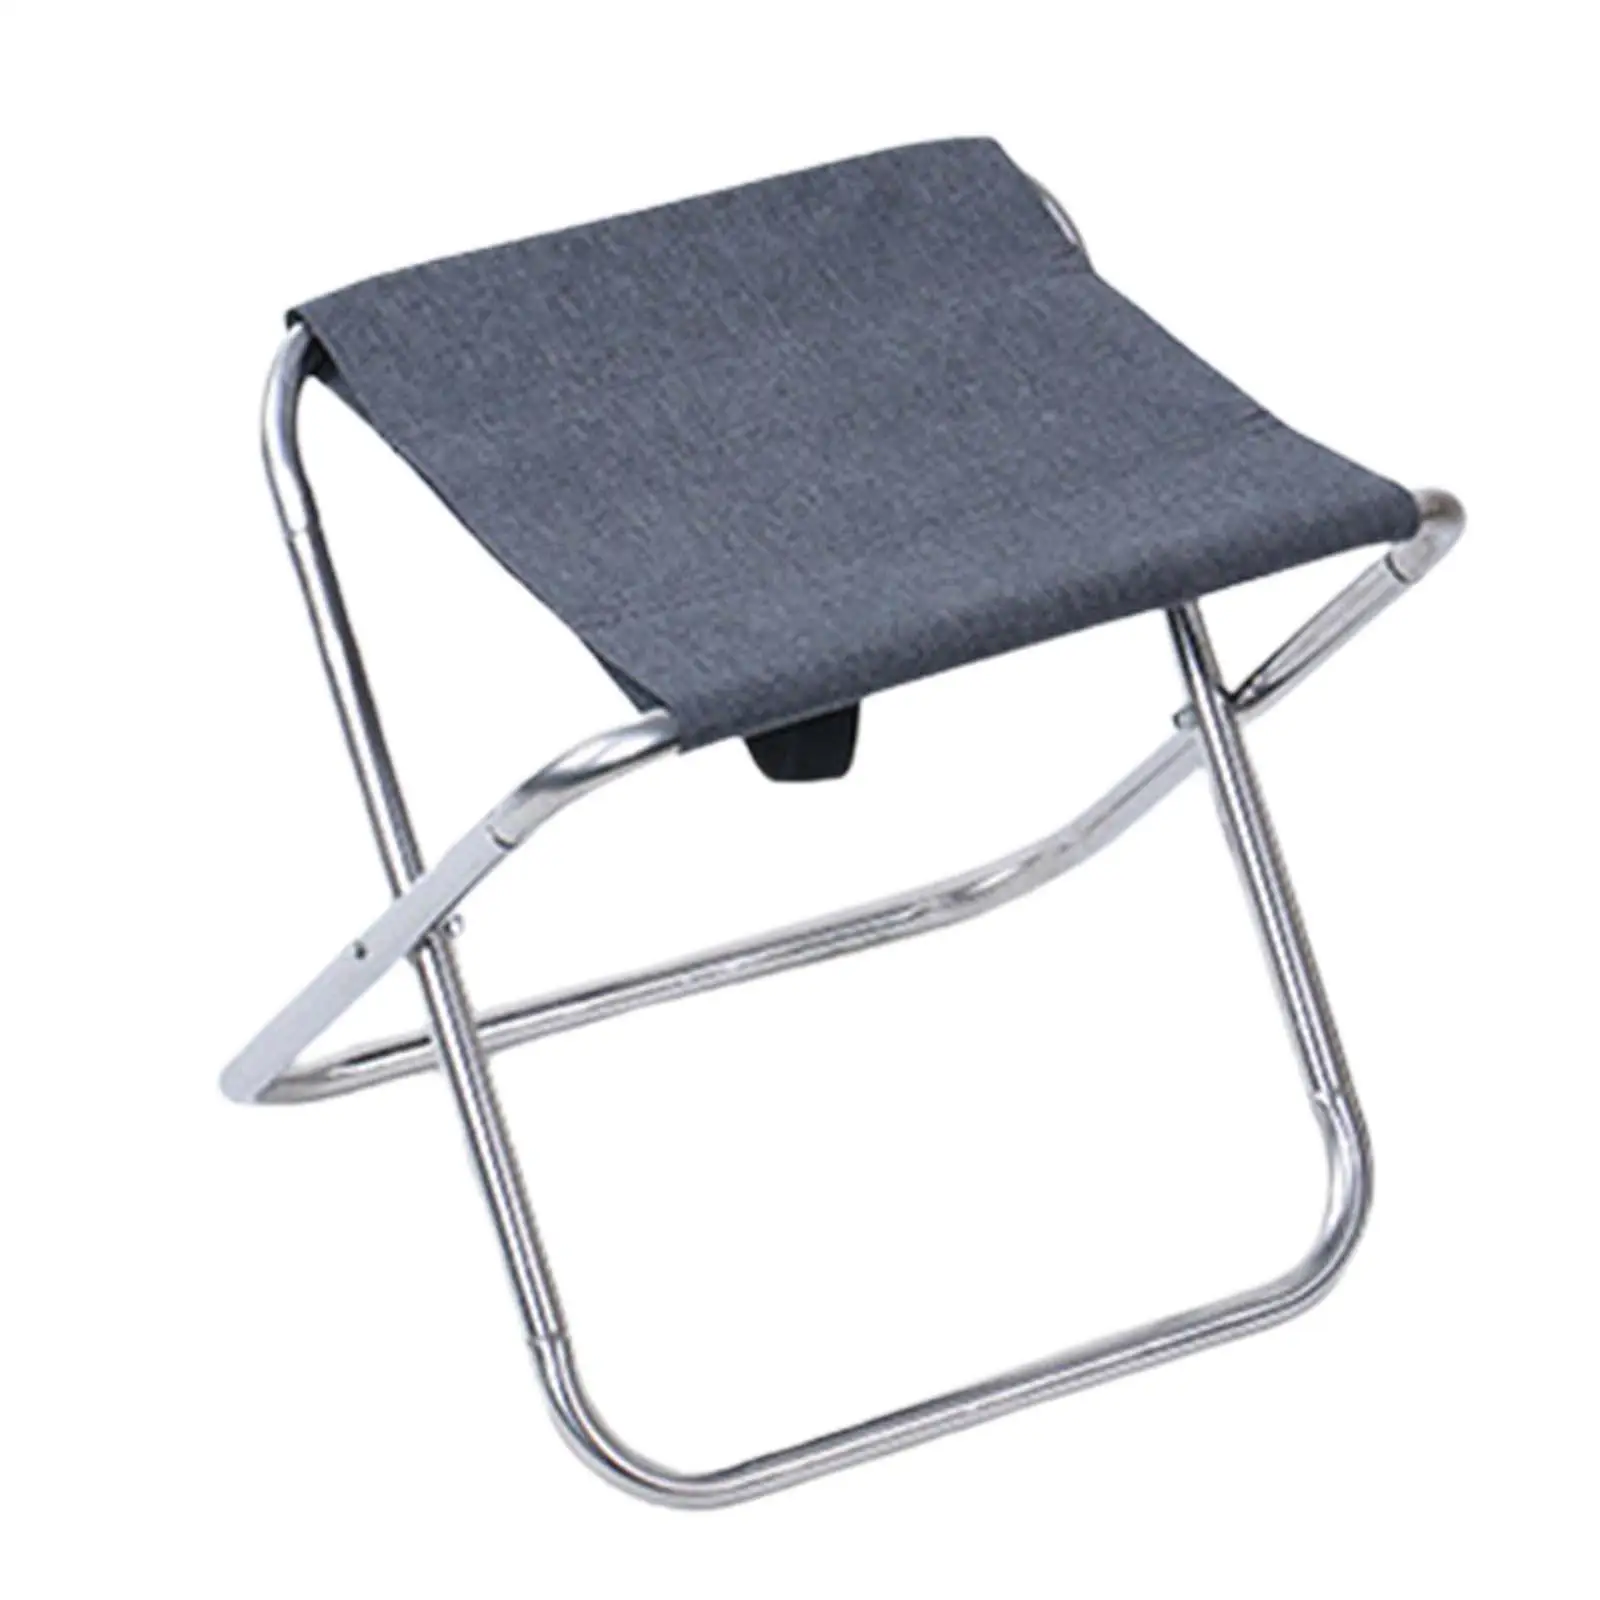 Folding Stool Camping Ultralight Camp Stool Easy to Carry Small Outdoor Fishing Chair for Patio Barbecue Lawn Sports Backpacking